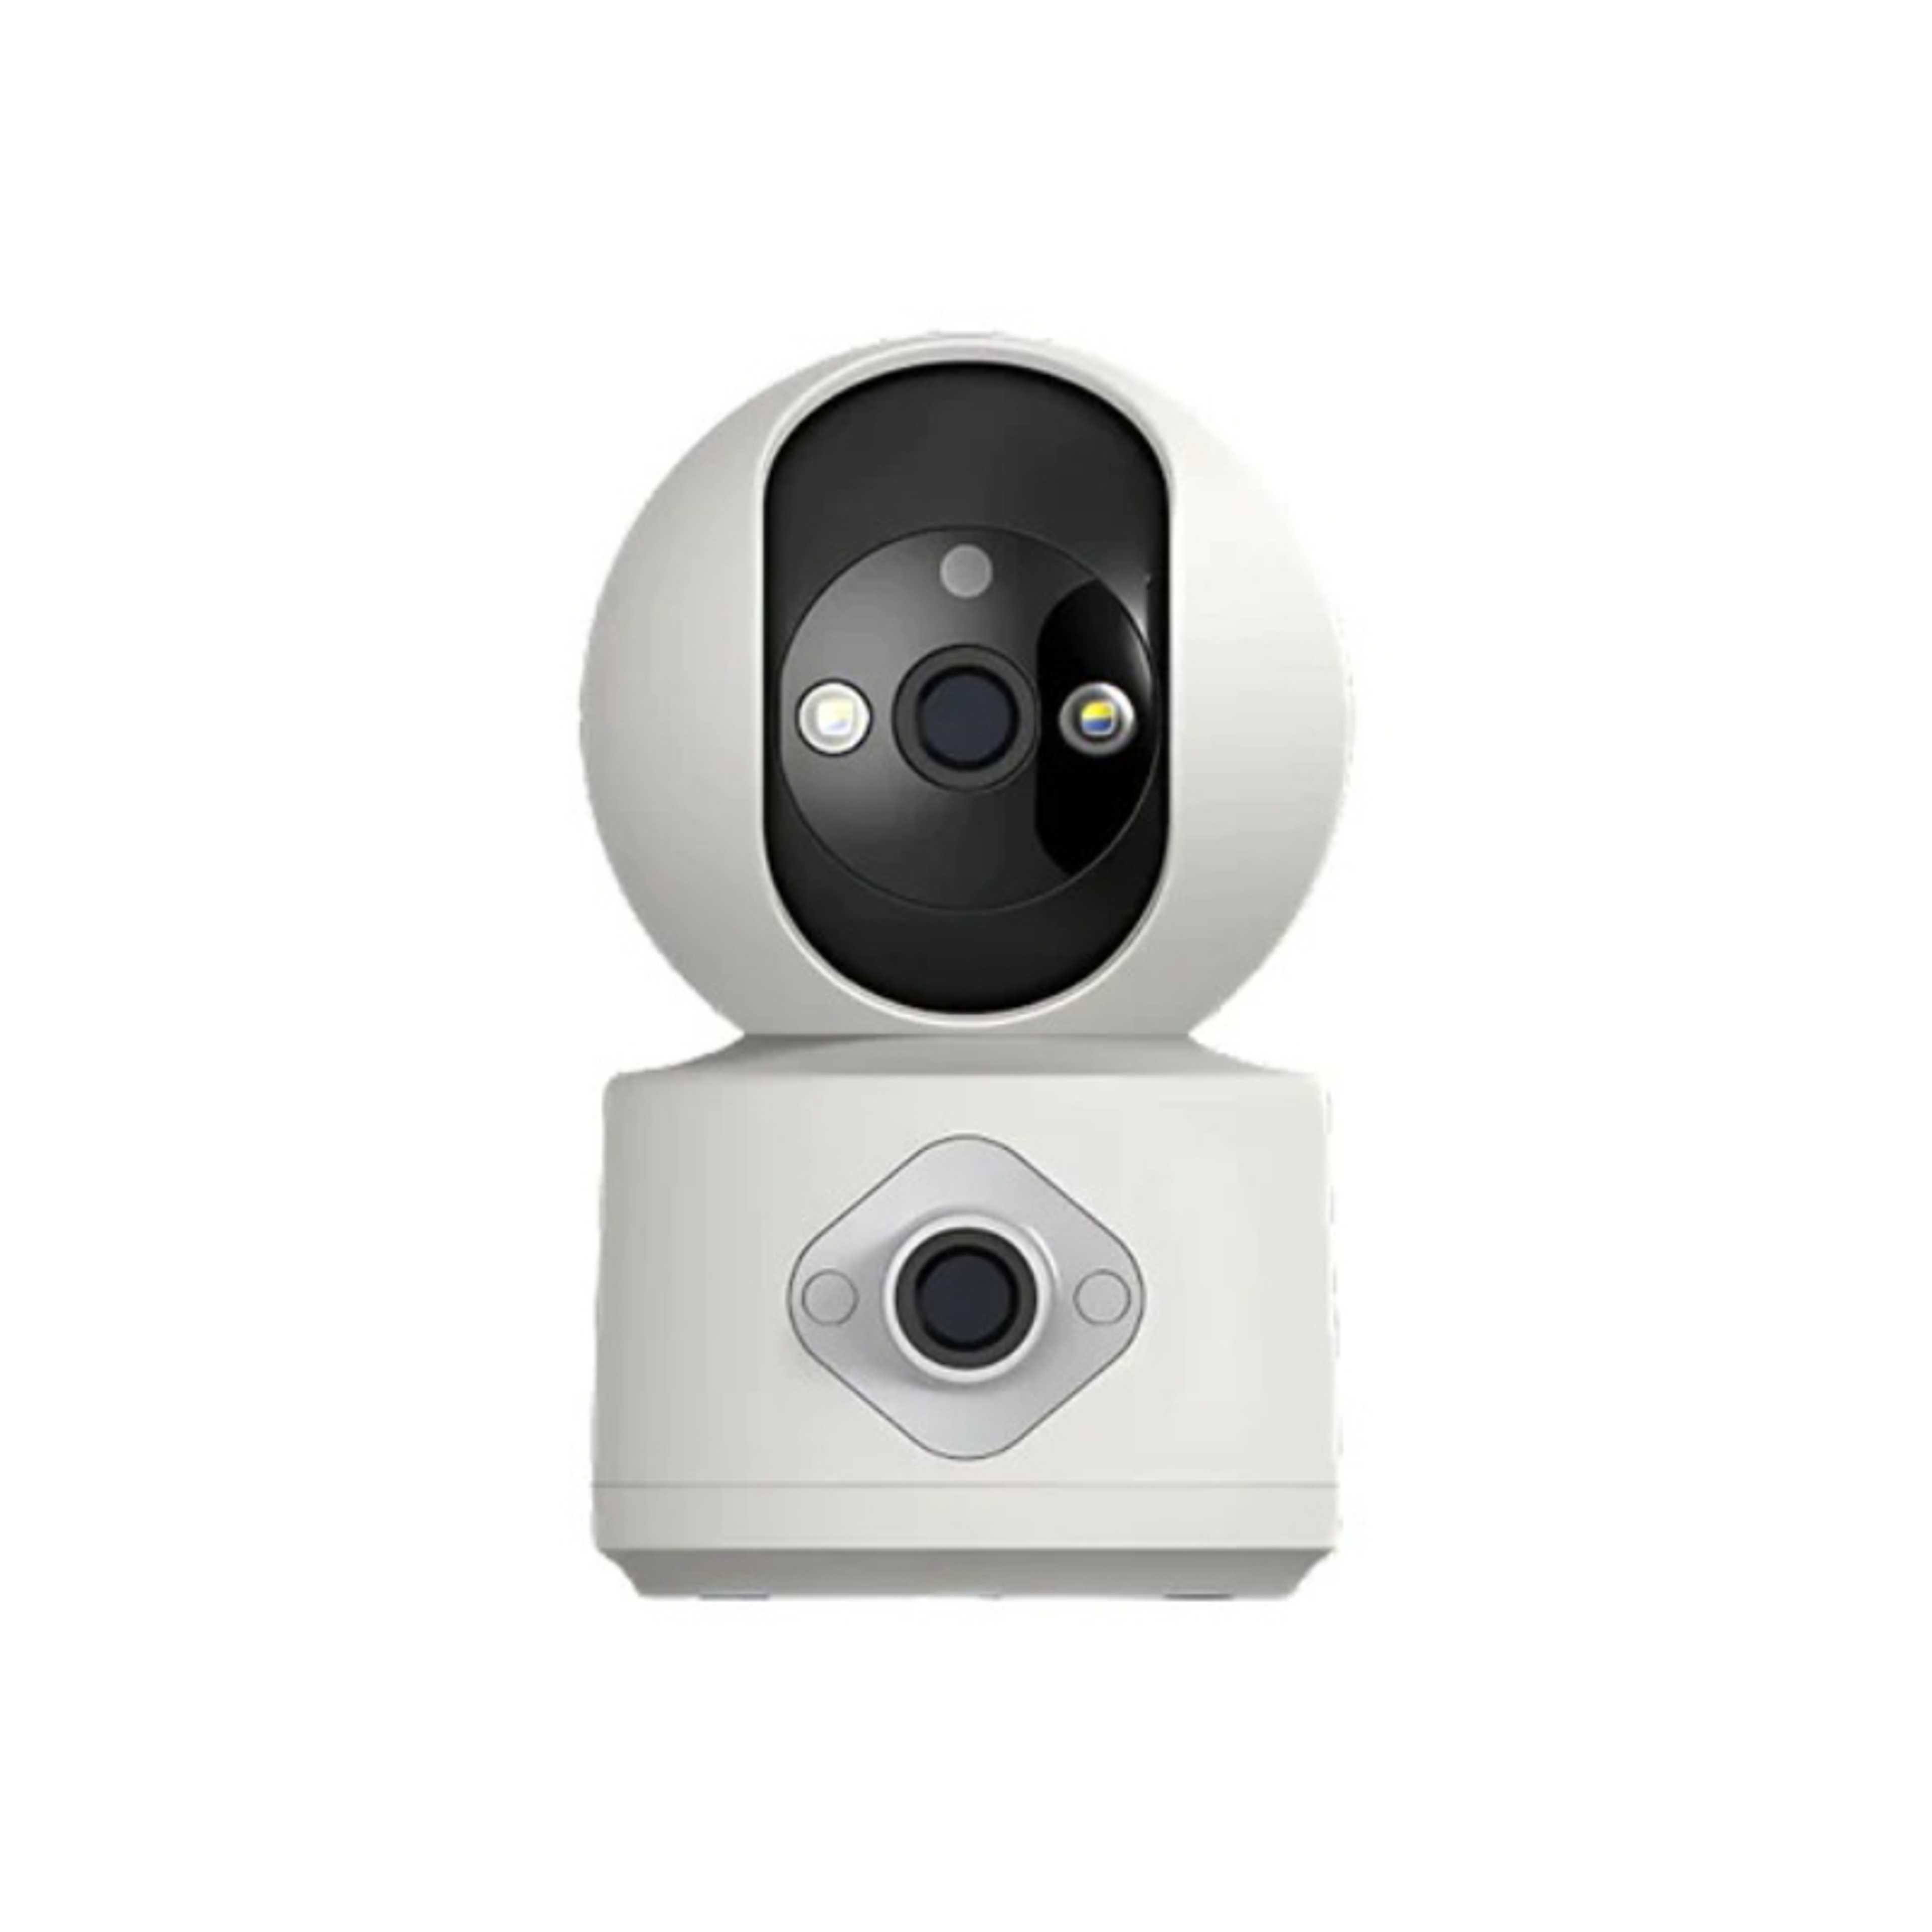 Faster A40 Smart HD Wifi 4 Mp Camera Indoor & Outdoor Built In Mic And Speaker Security Camera Dual Lens Screen 360° View With Motion Detection Auto Tracking, Night Vision Feature